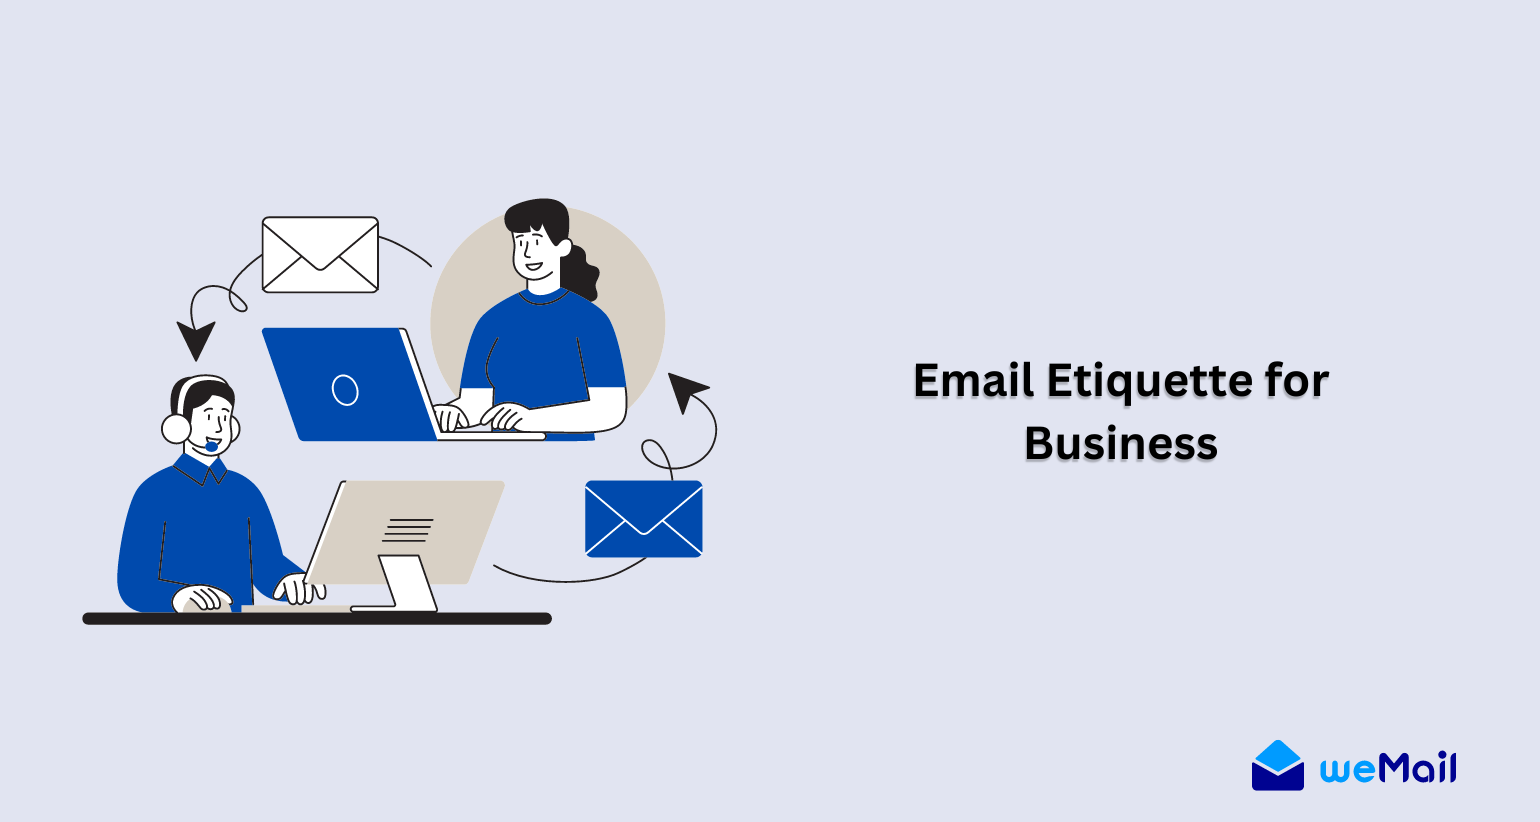 Email Etiquette for Business